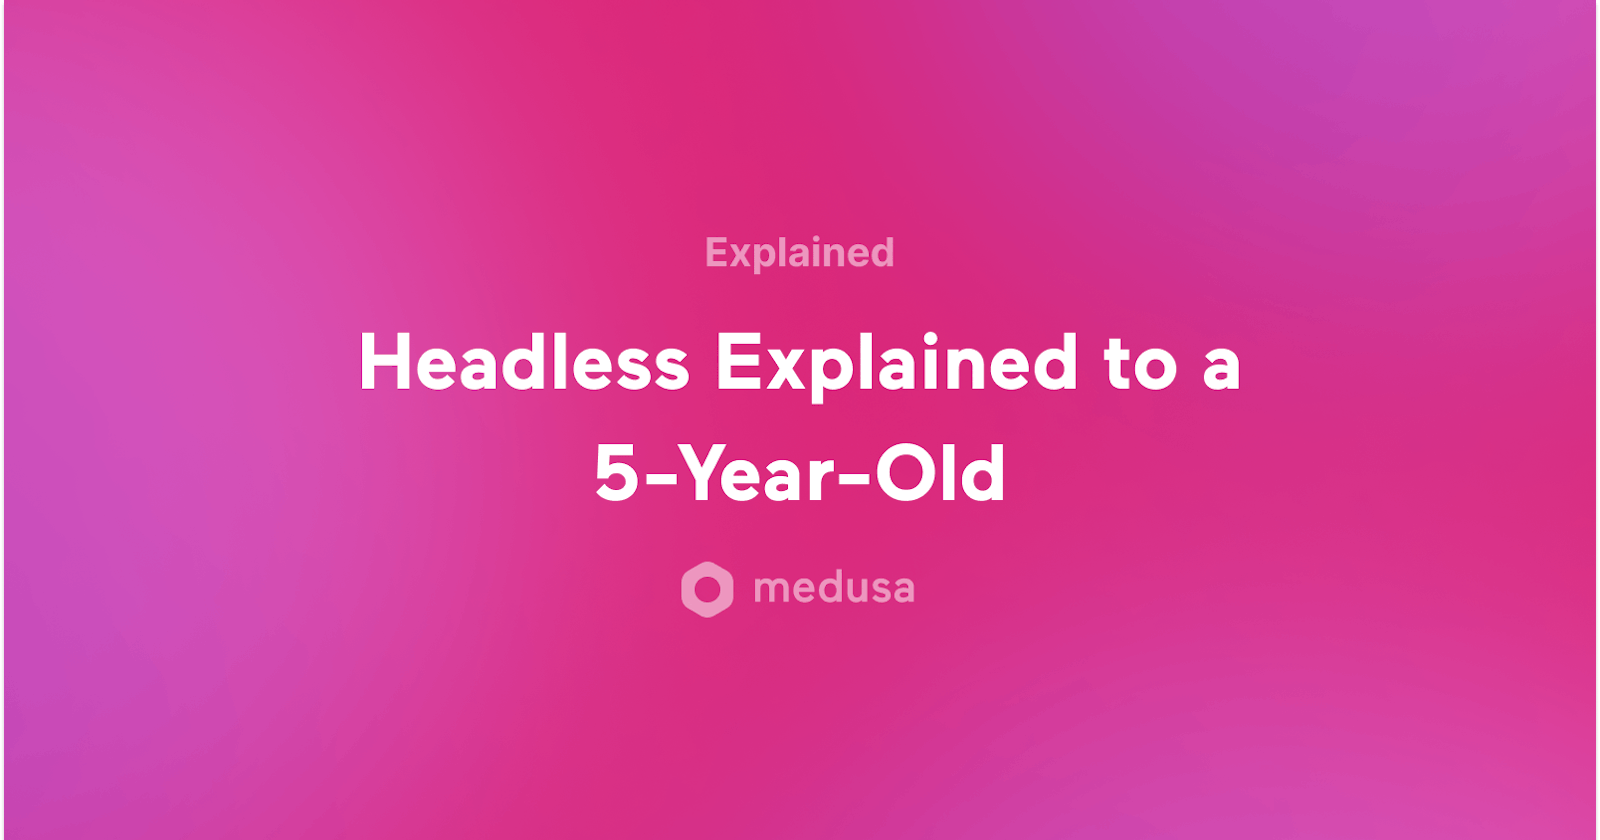 Headless Explained to a 5-Year-Old